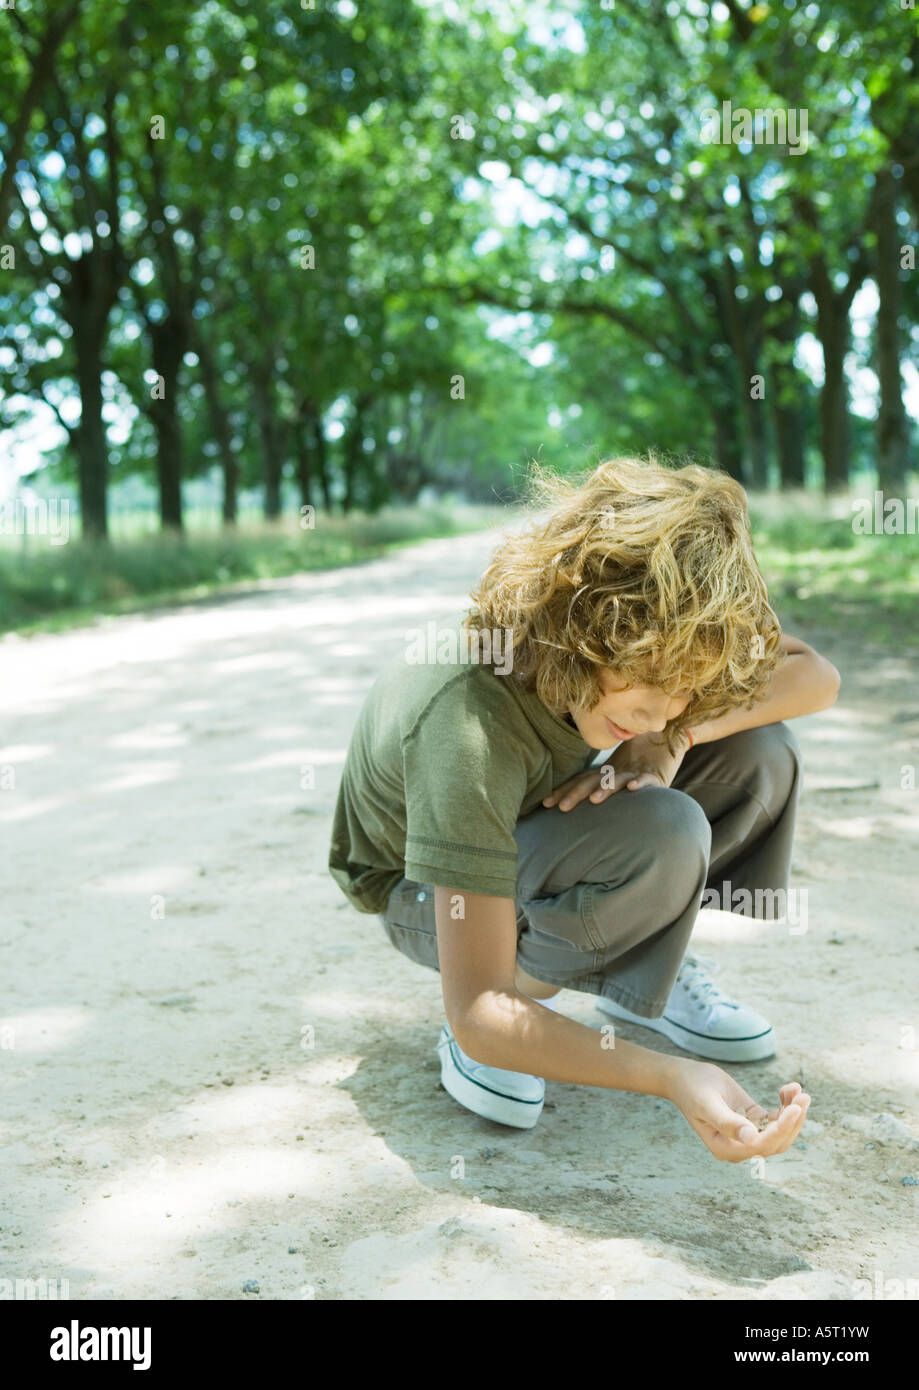 Boy crouching in dirt road Stock Photo